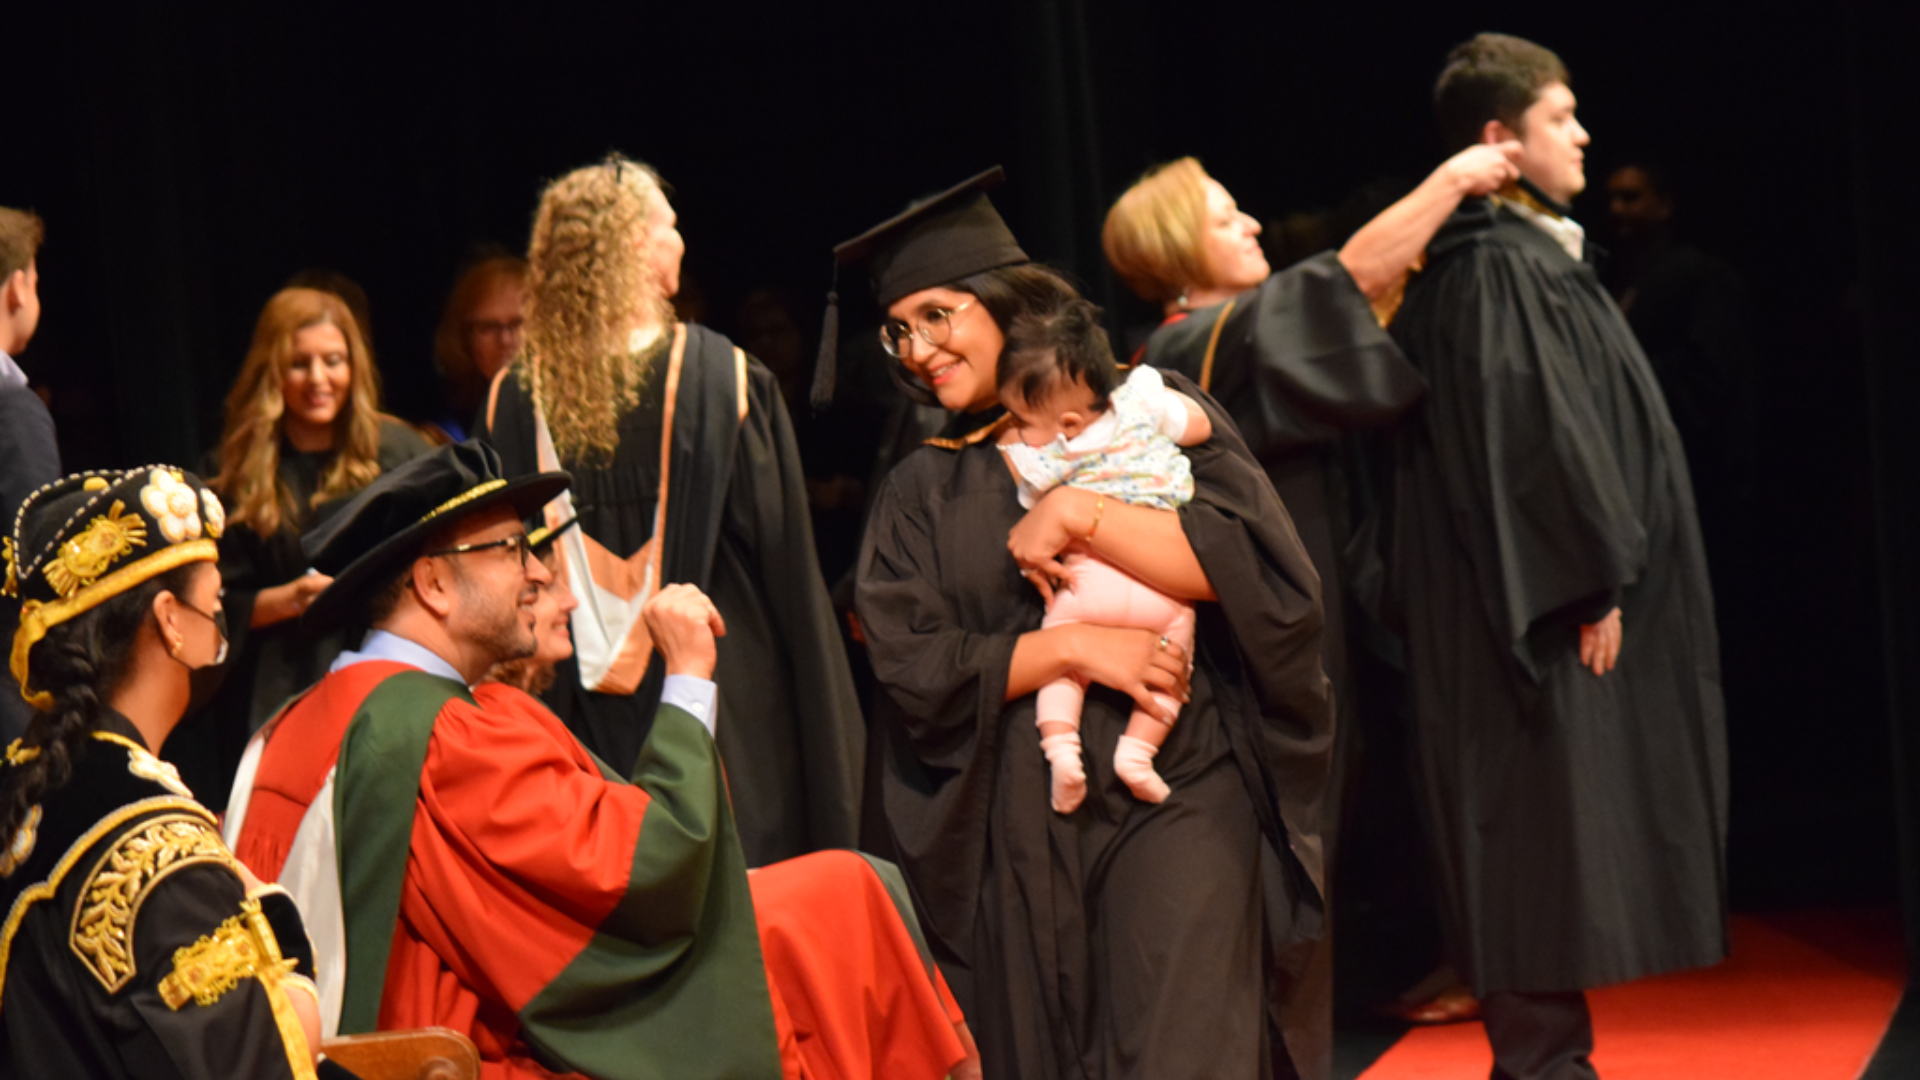 A DeGroote School of Business graduate crosses the stage at convocation with her baby in her arms 